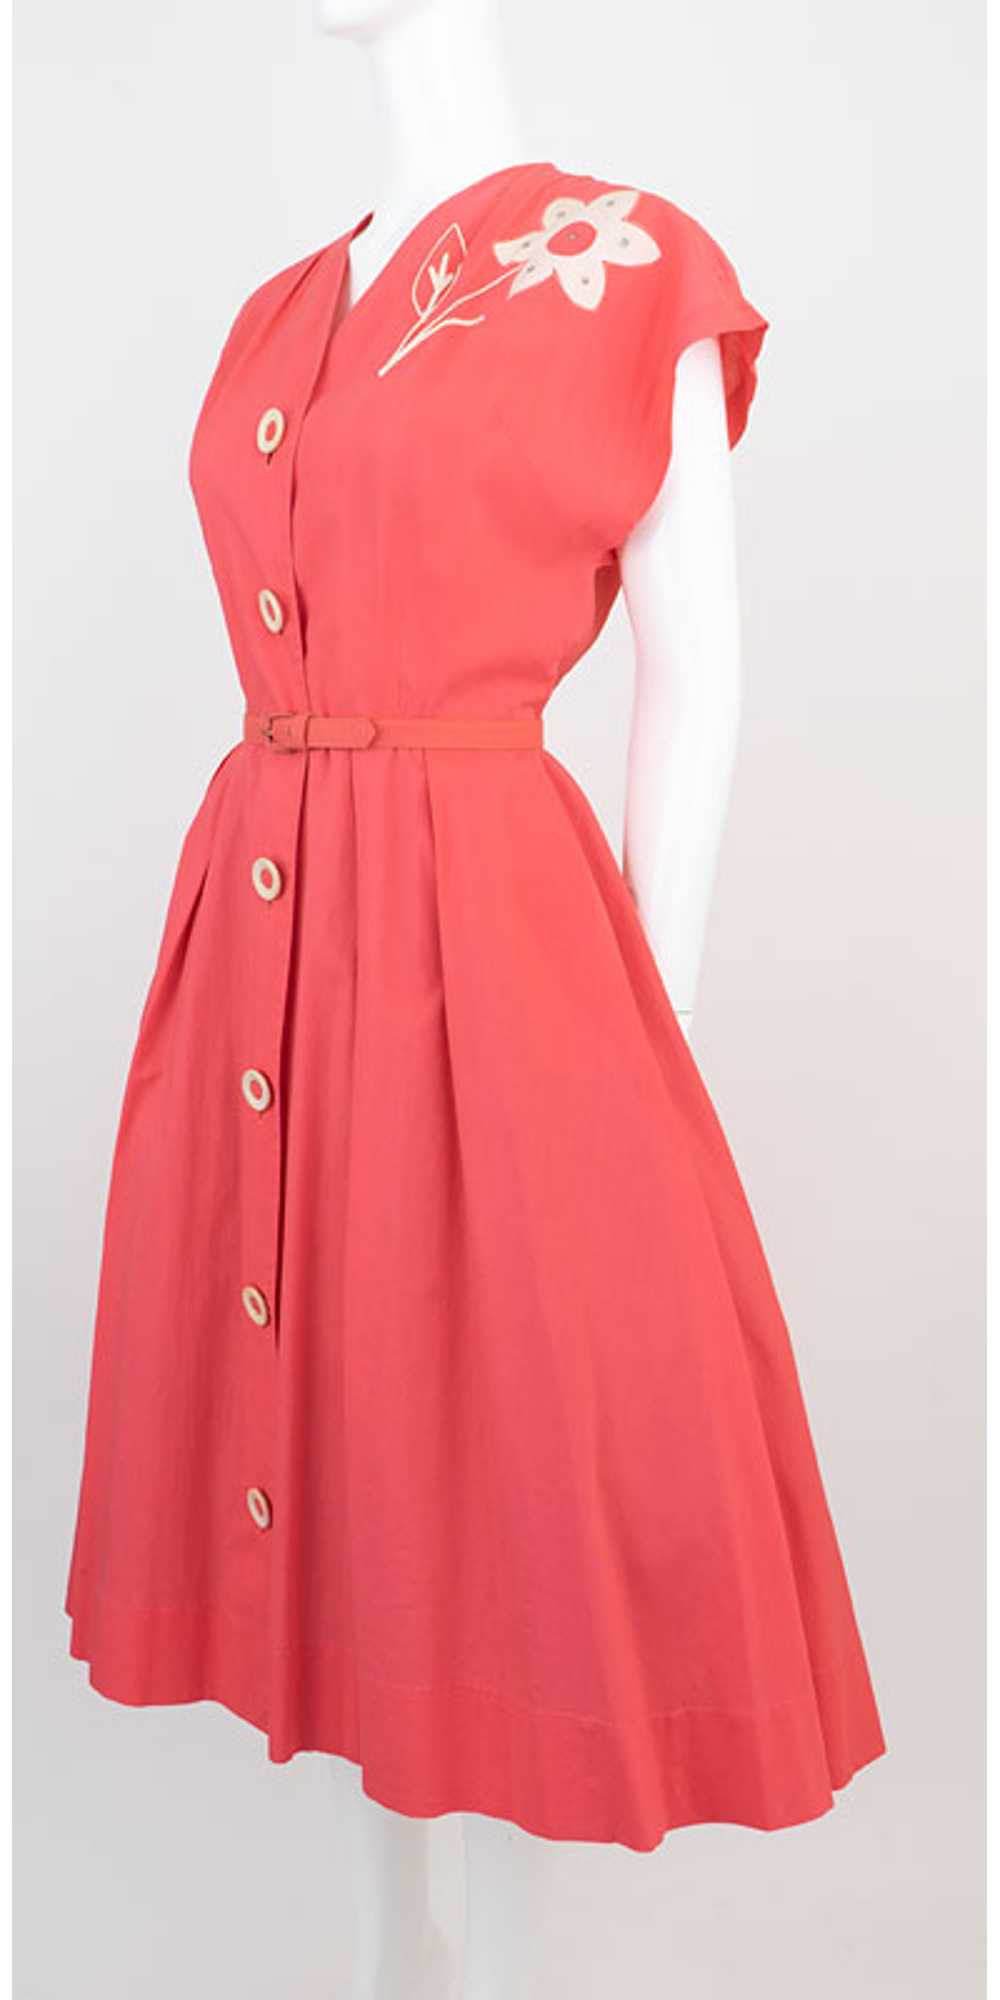 Pretty in Pink 1950s Dress - image 2